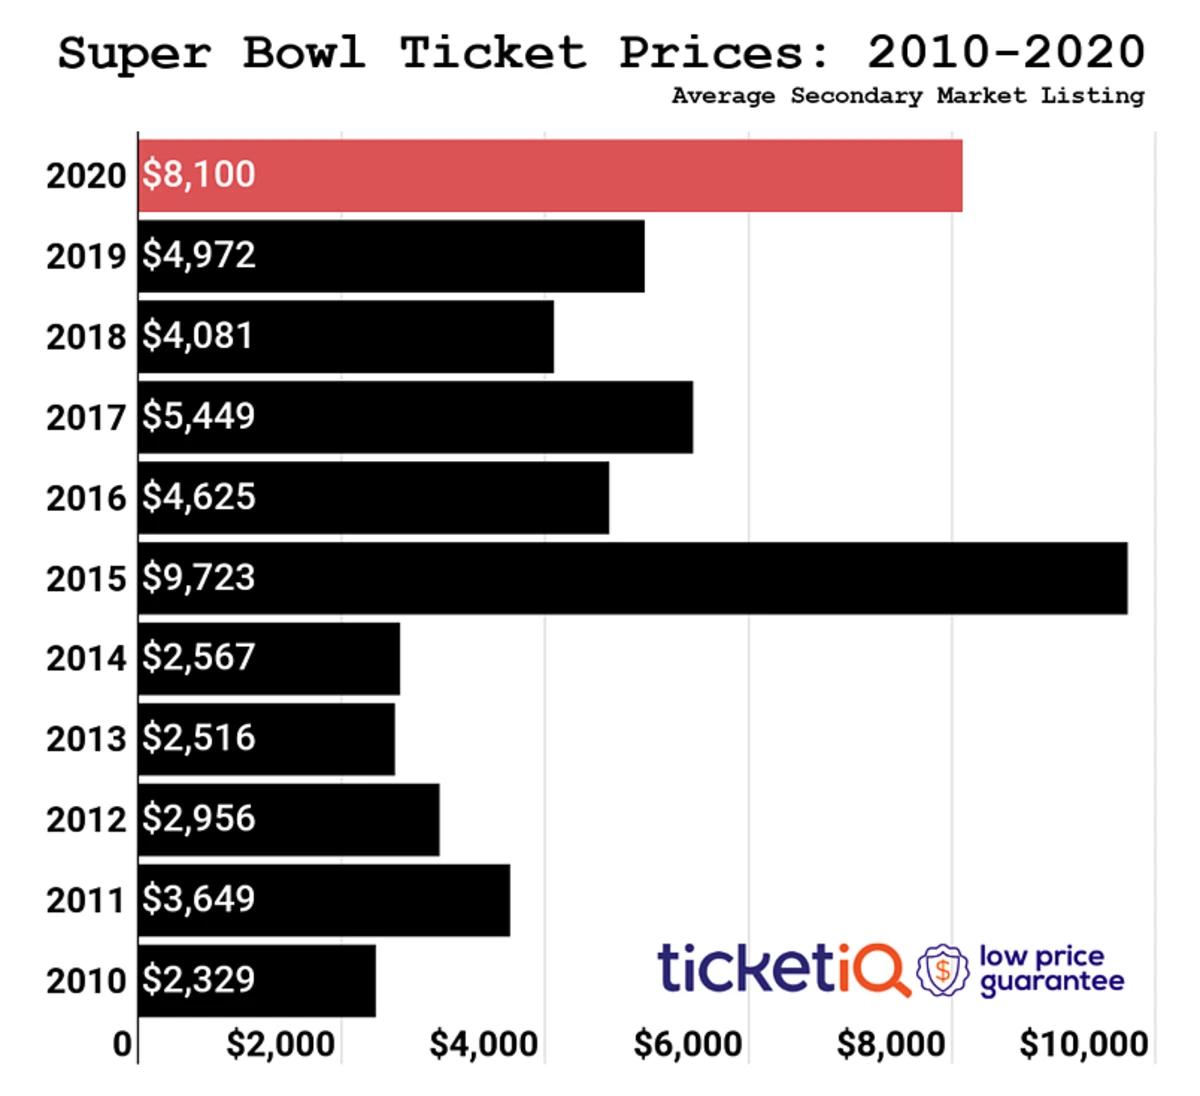 How Much Do Super Bowl Tickets Cost?